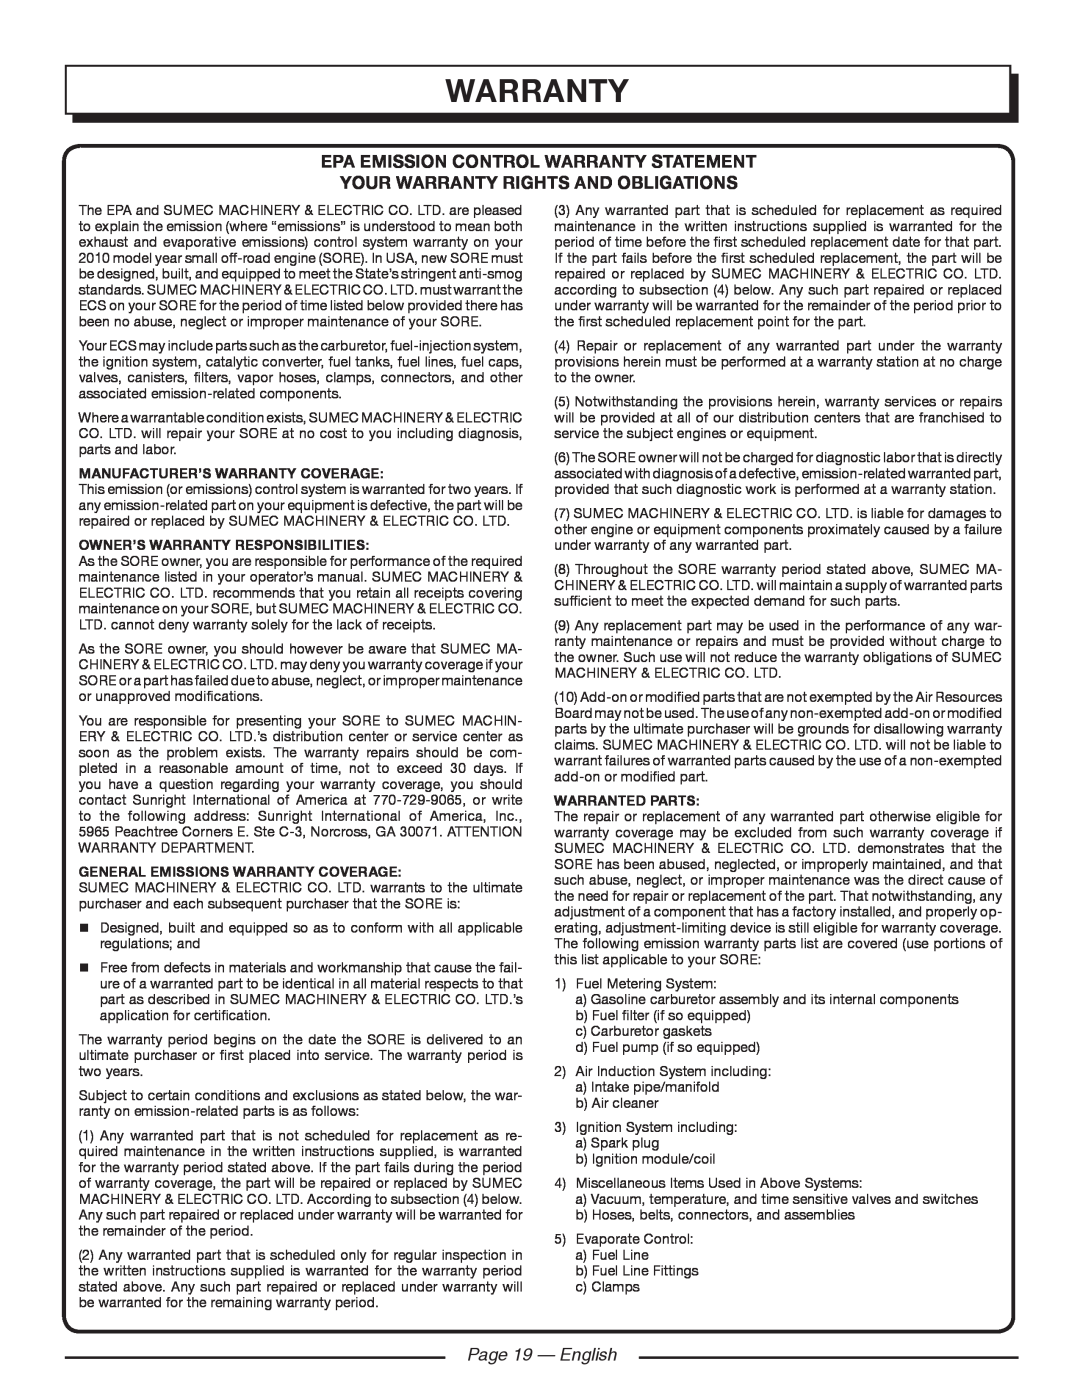 Homelite HGCA1400 Page 19 - English, Manufacturer’S Warranty Coverage, Owner’S Warranty Responsibilities 